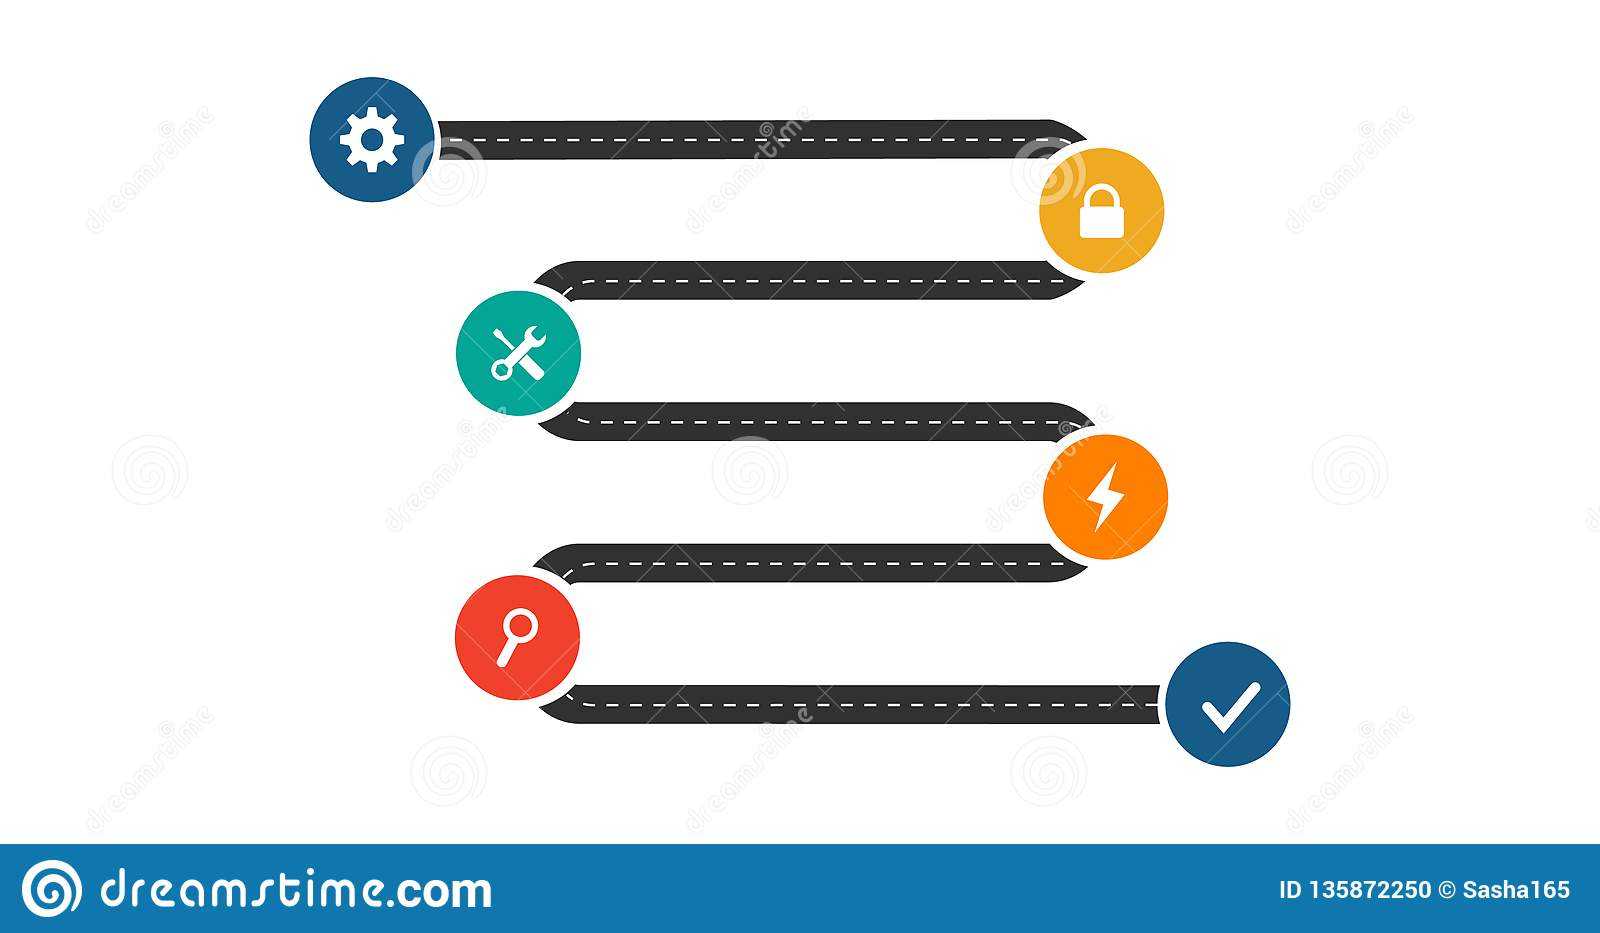 Business Road Map Timeline Infographic Template With Circles Regarding Blank Road Map Template